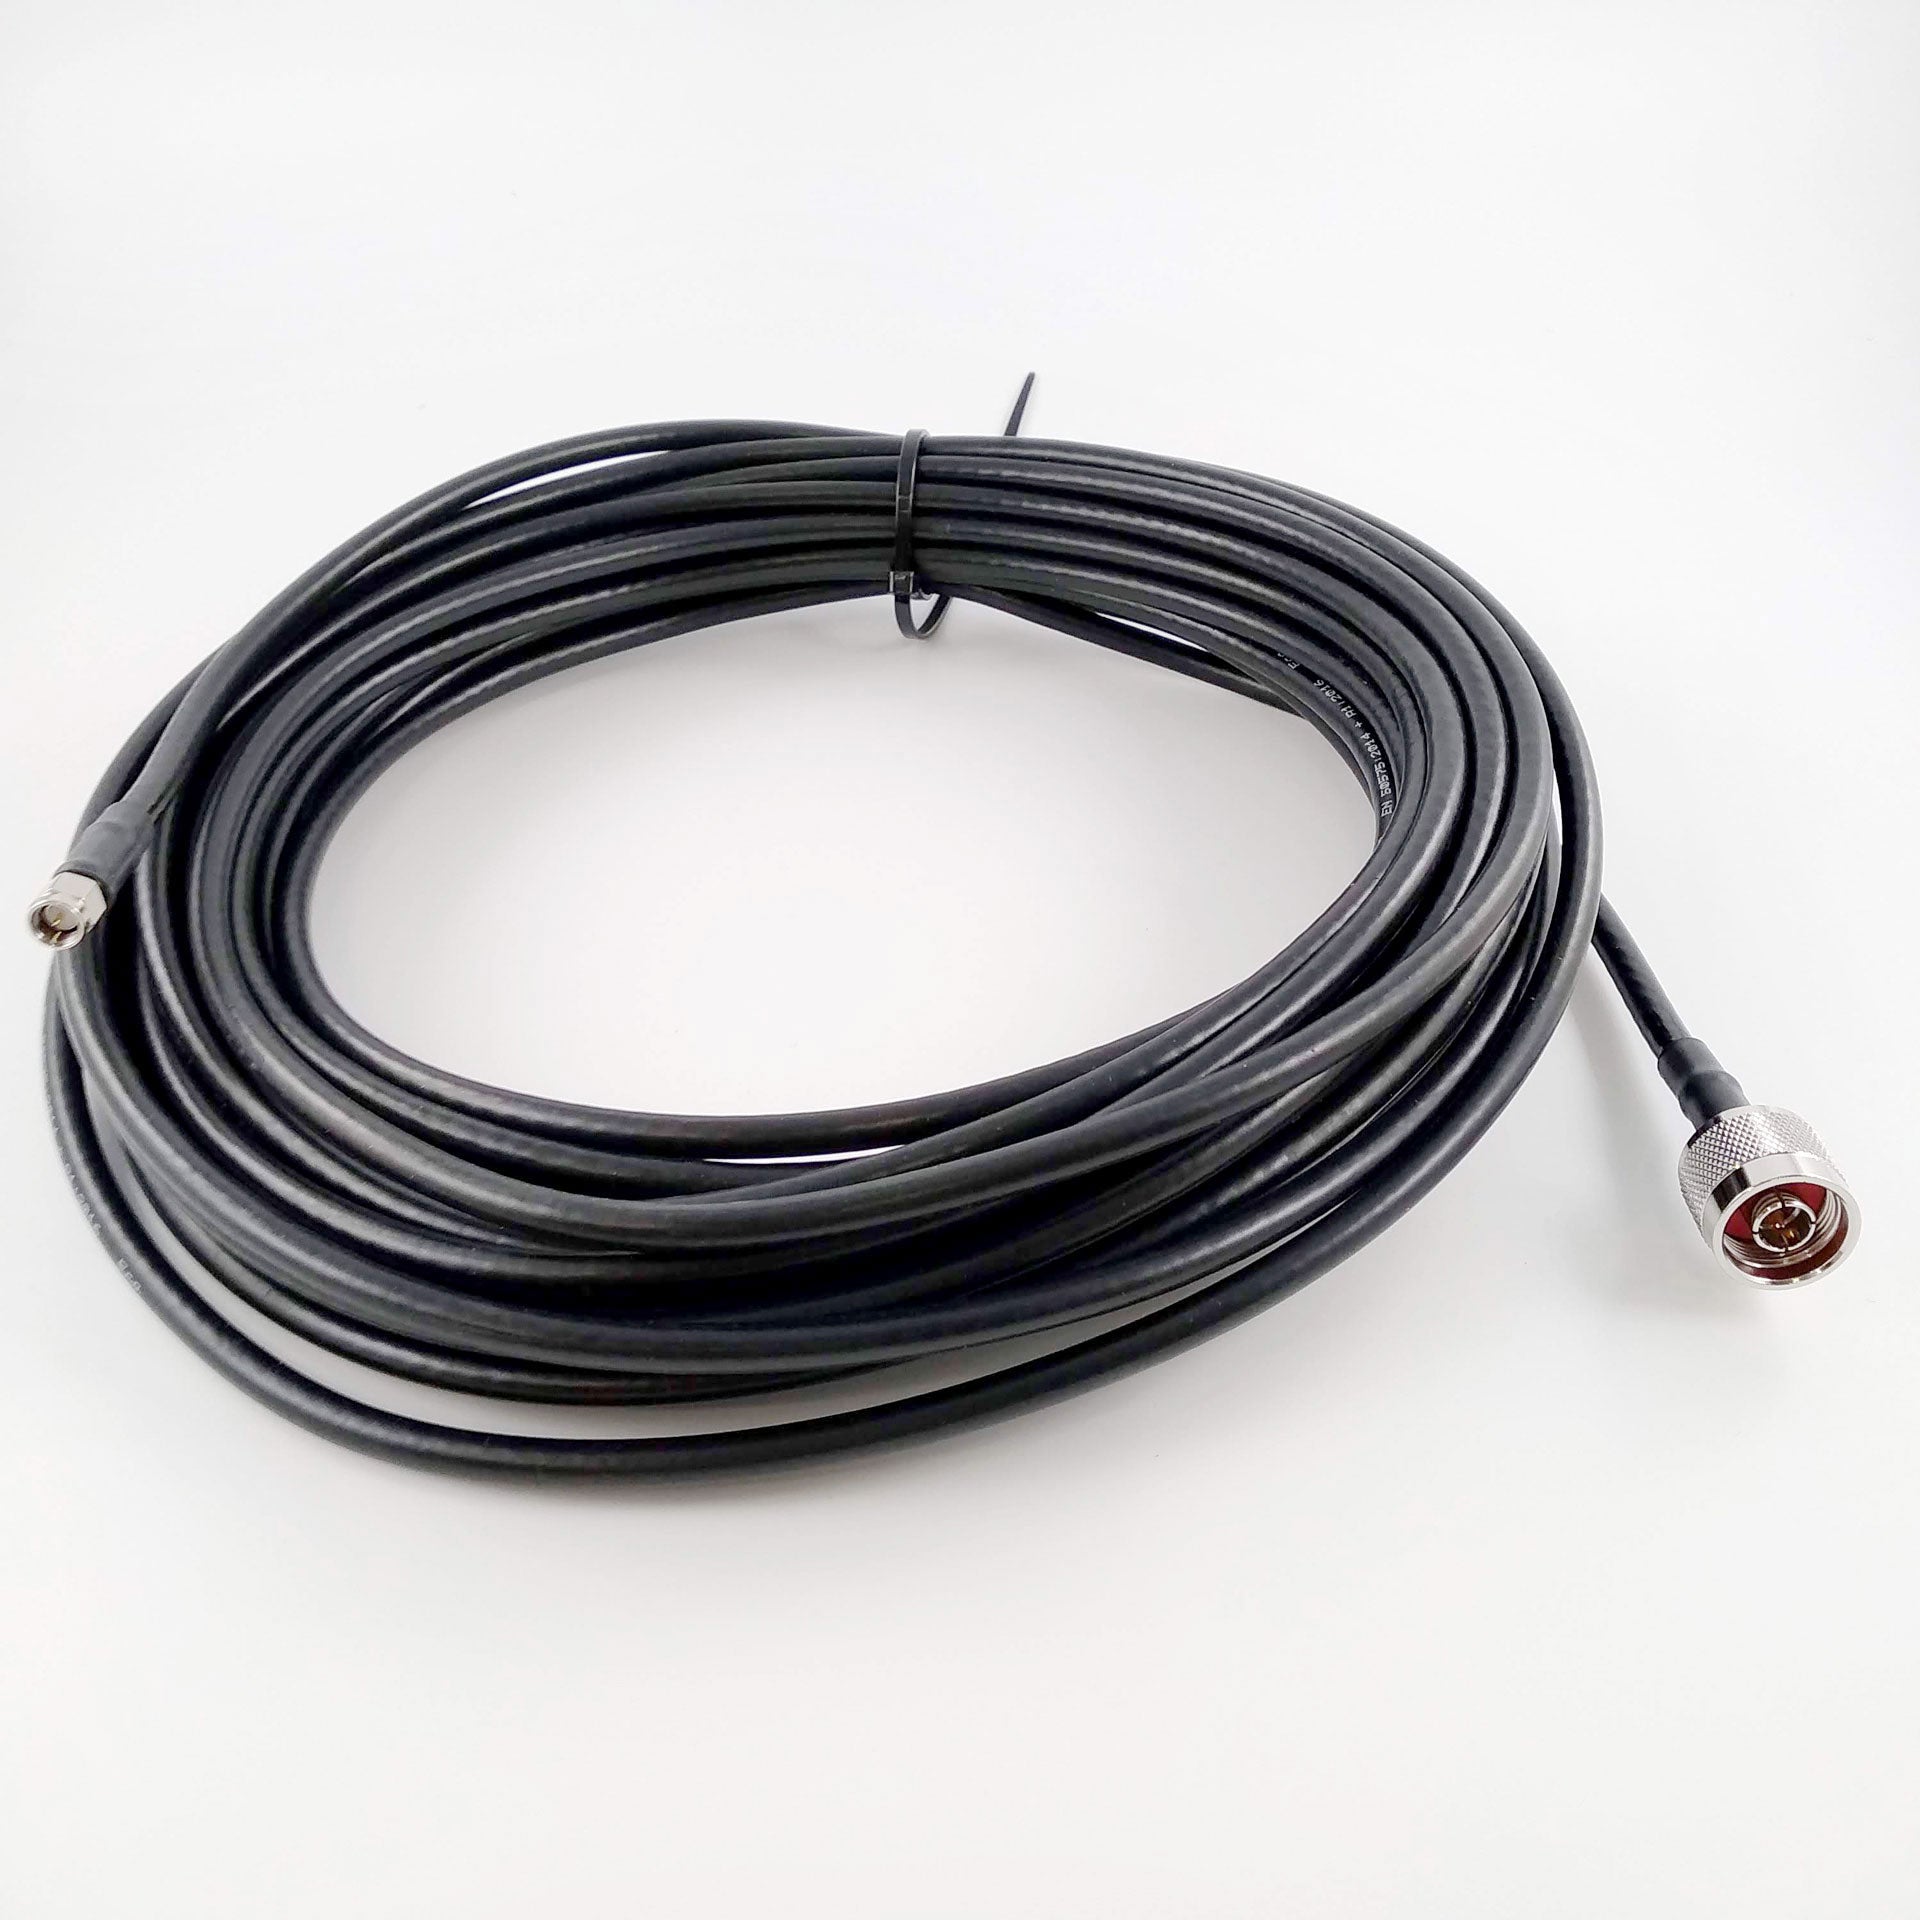 15M Cable for UHF Antenna 4/5G